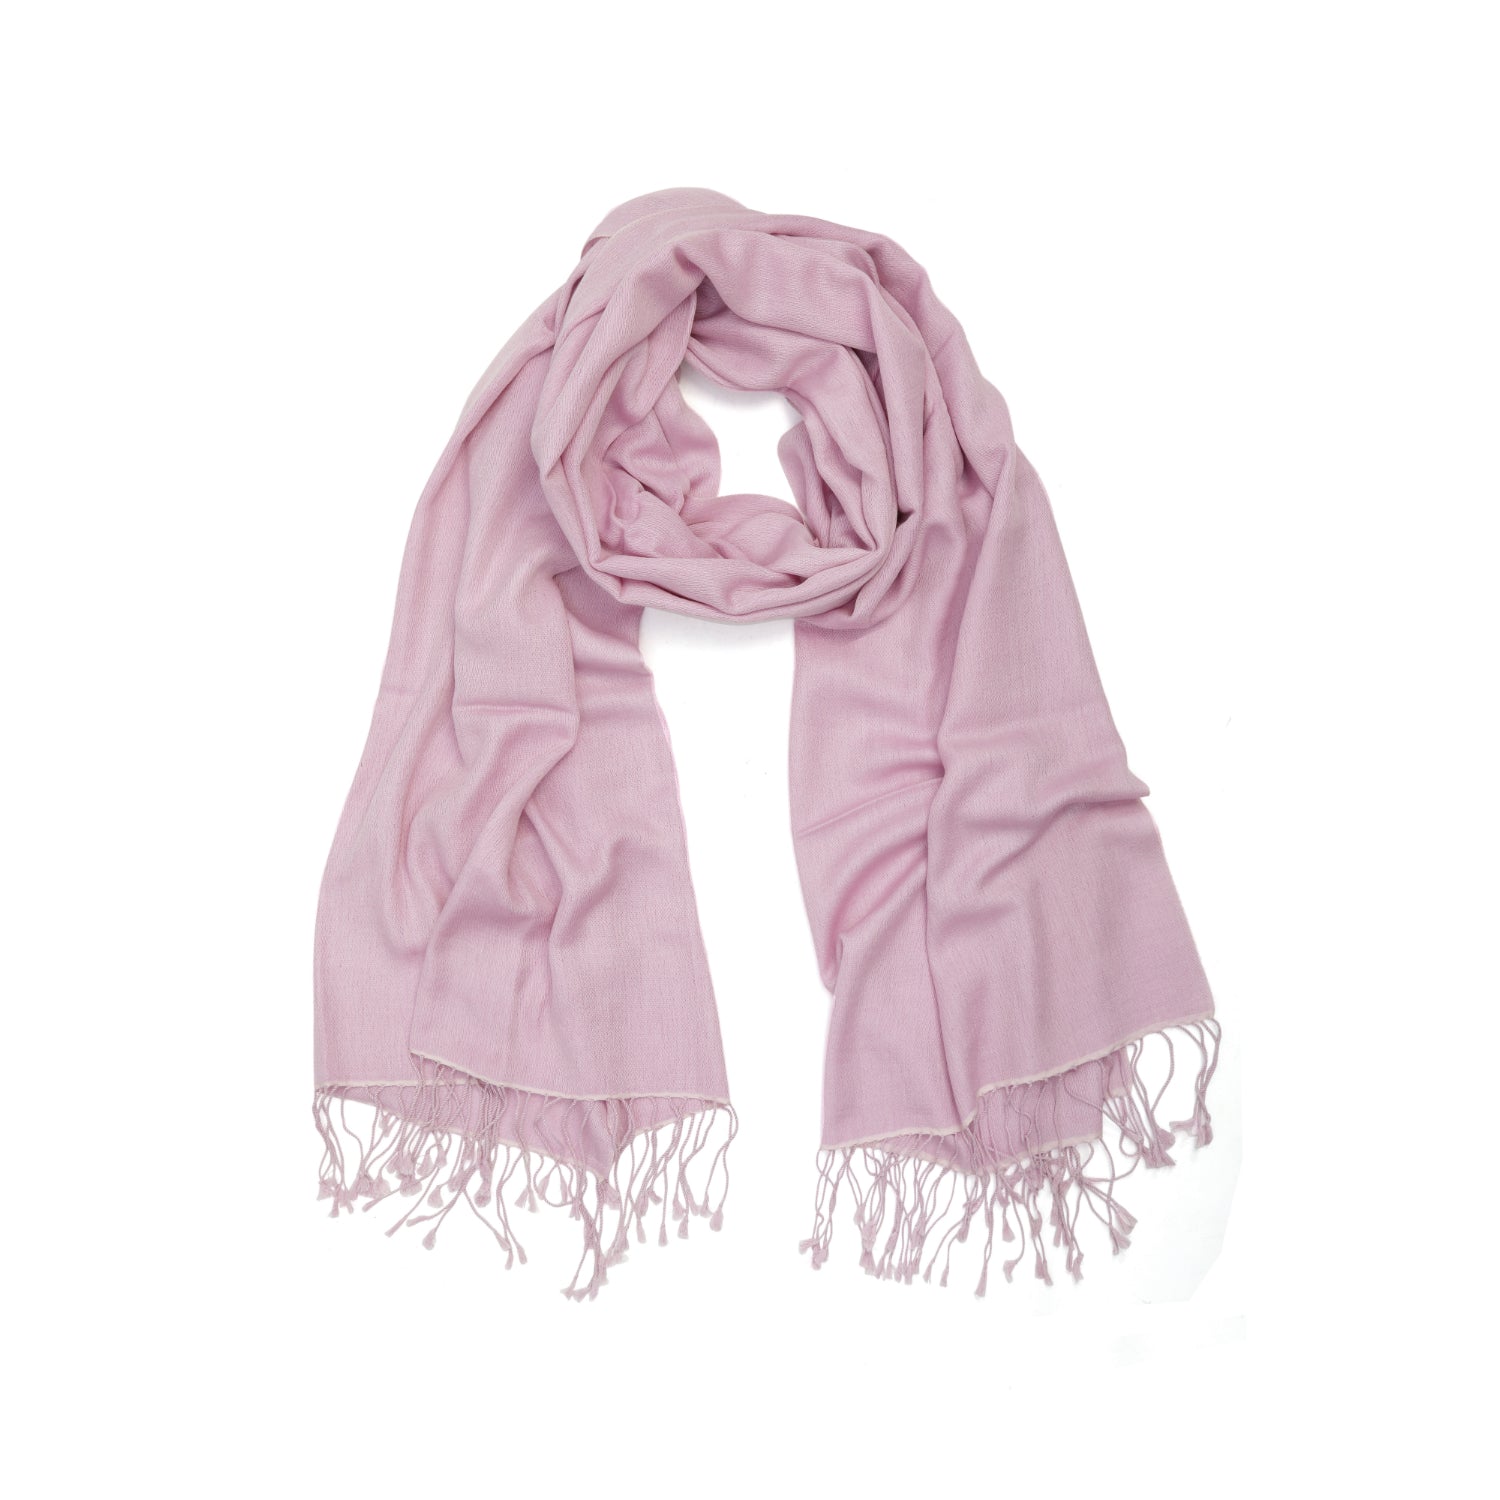 Buy Ladies Lilac Pashmina Stole | Shawl | Wrap from The Cashmere Choice | London